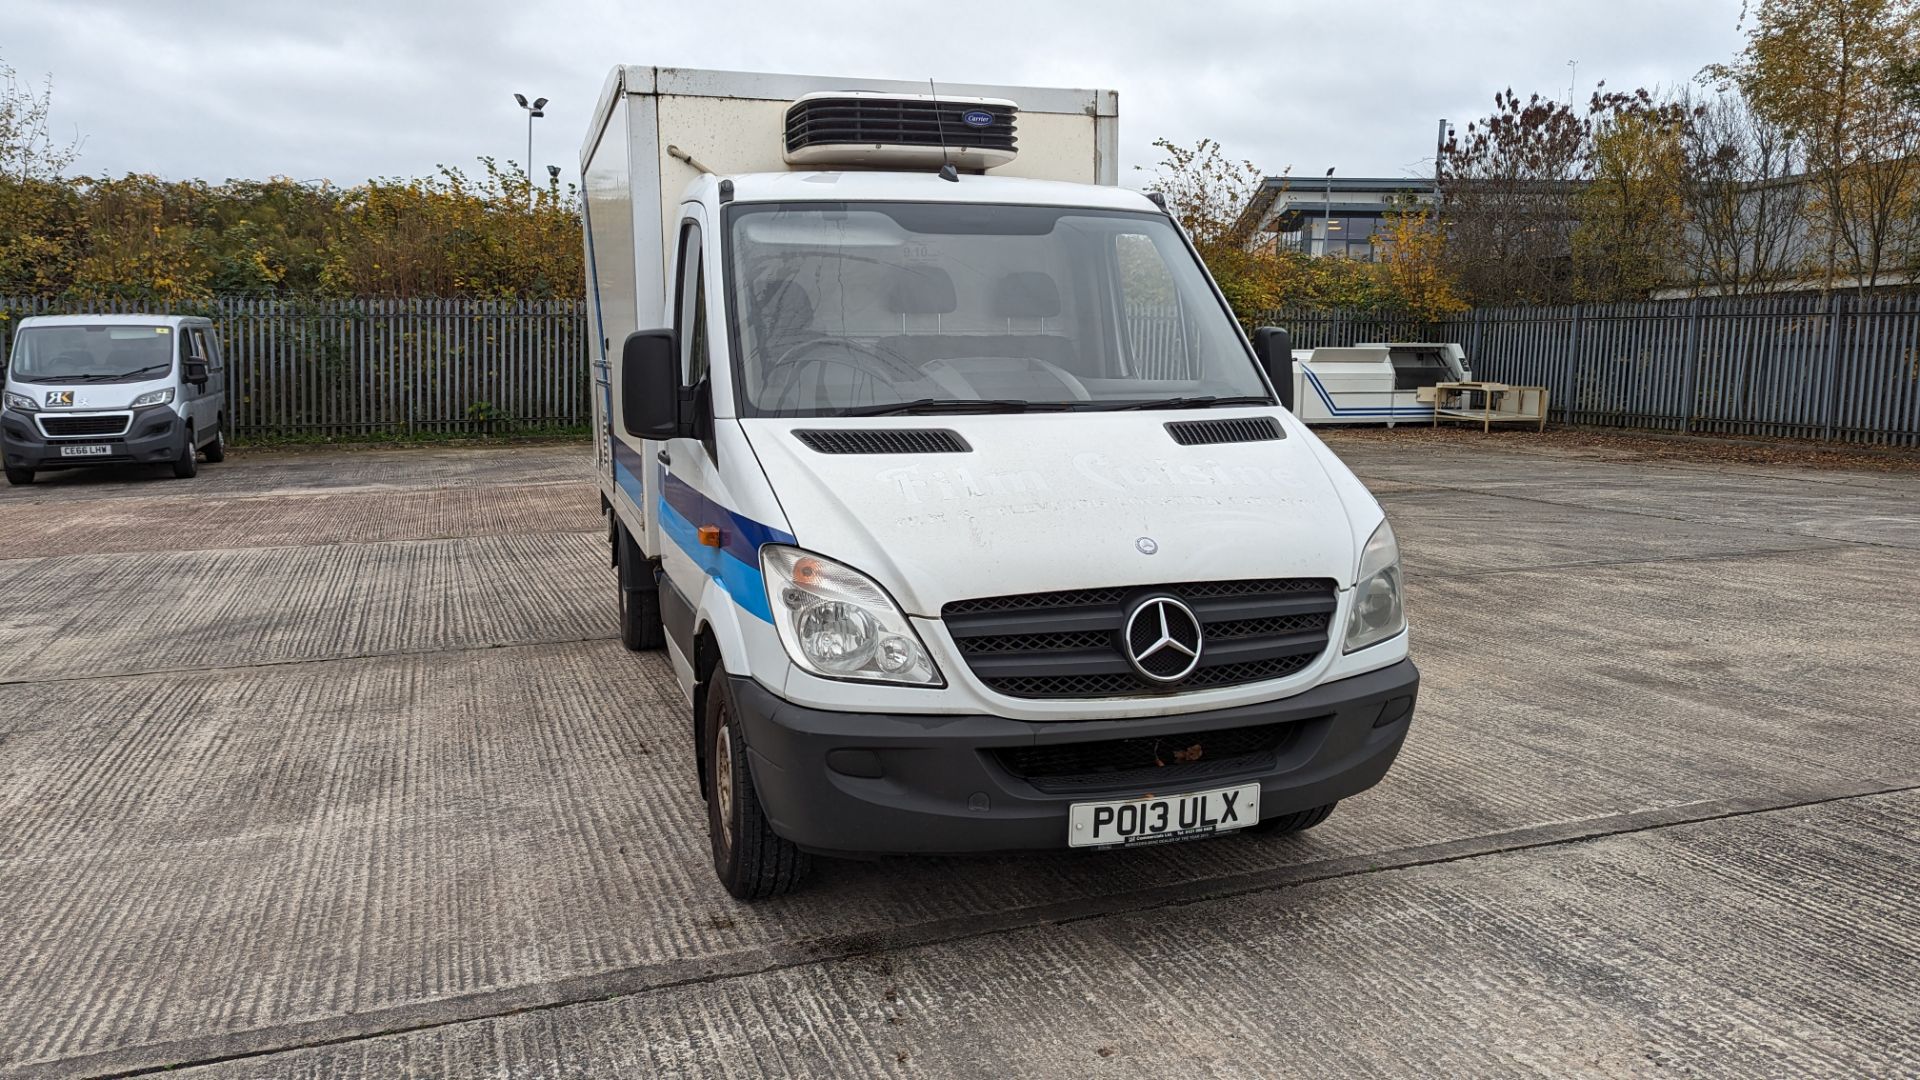 PO13 ULX Mercedes-Benz Sprinter 313 CDI refrigerated box van with onboard generator, 6 speed auto ge - Image 2 of 39